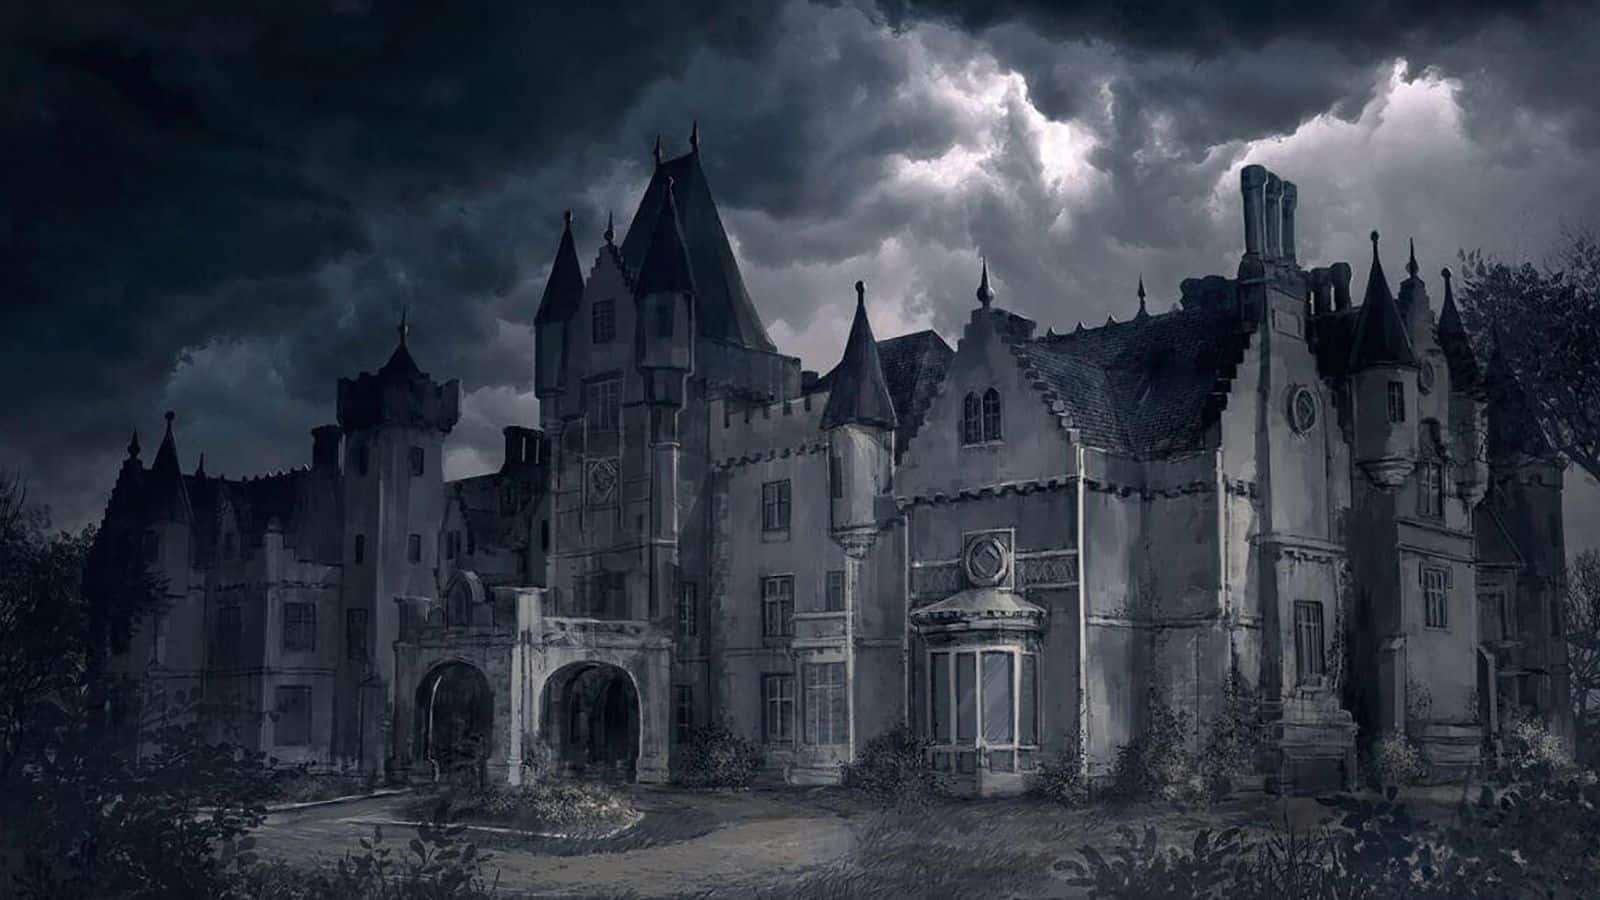 Love Gothic horror? Here are some unmissable books to read